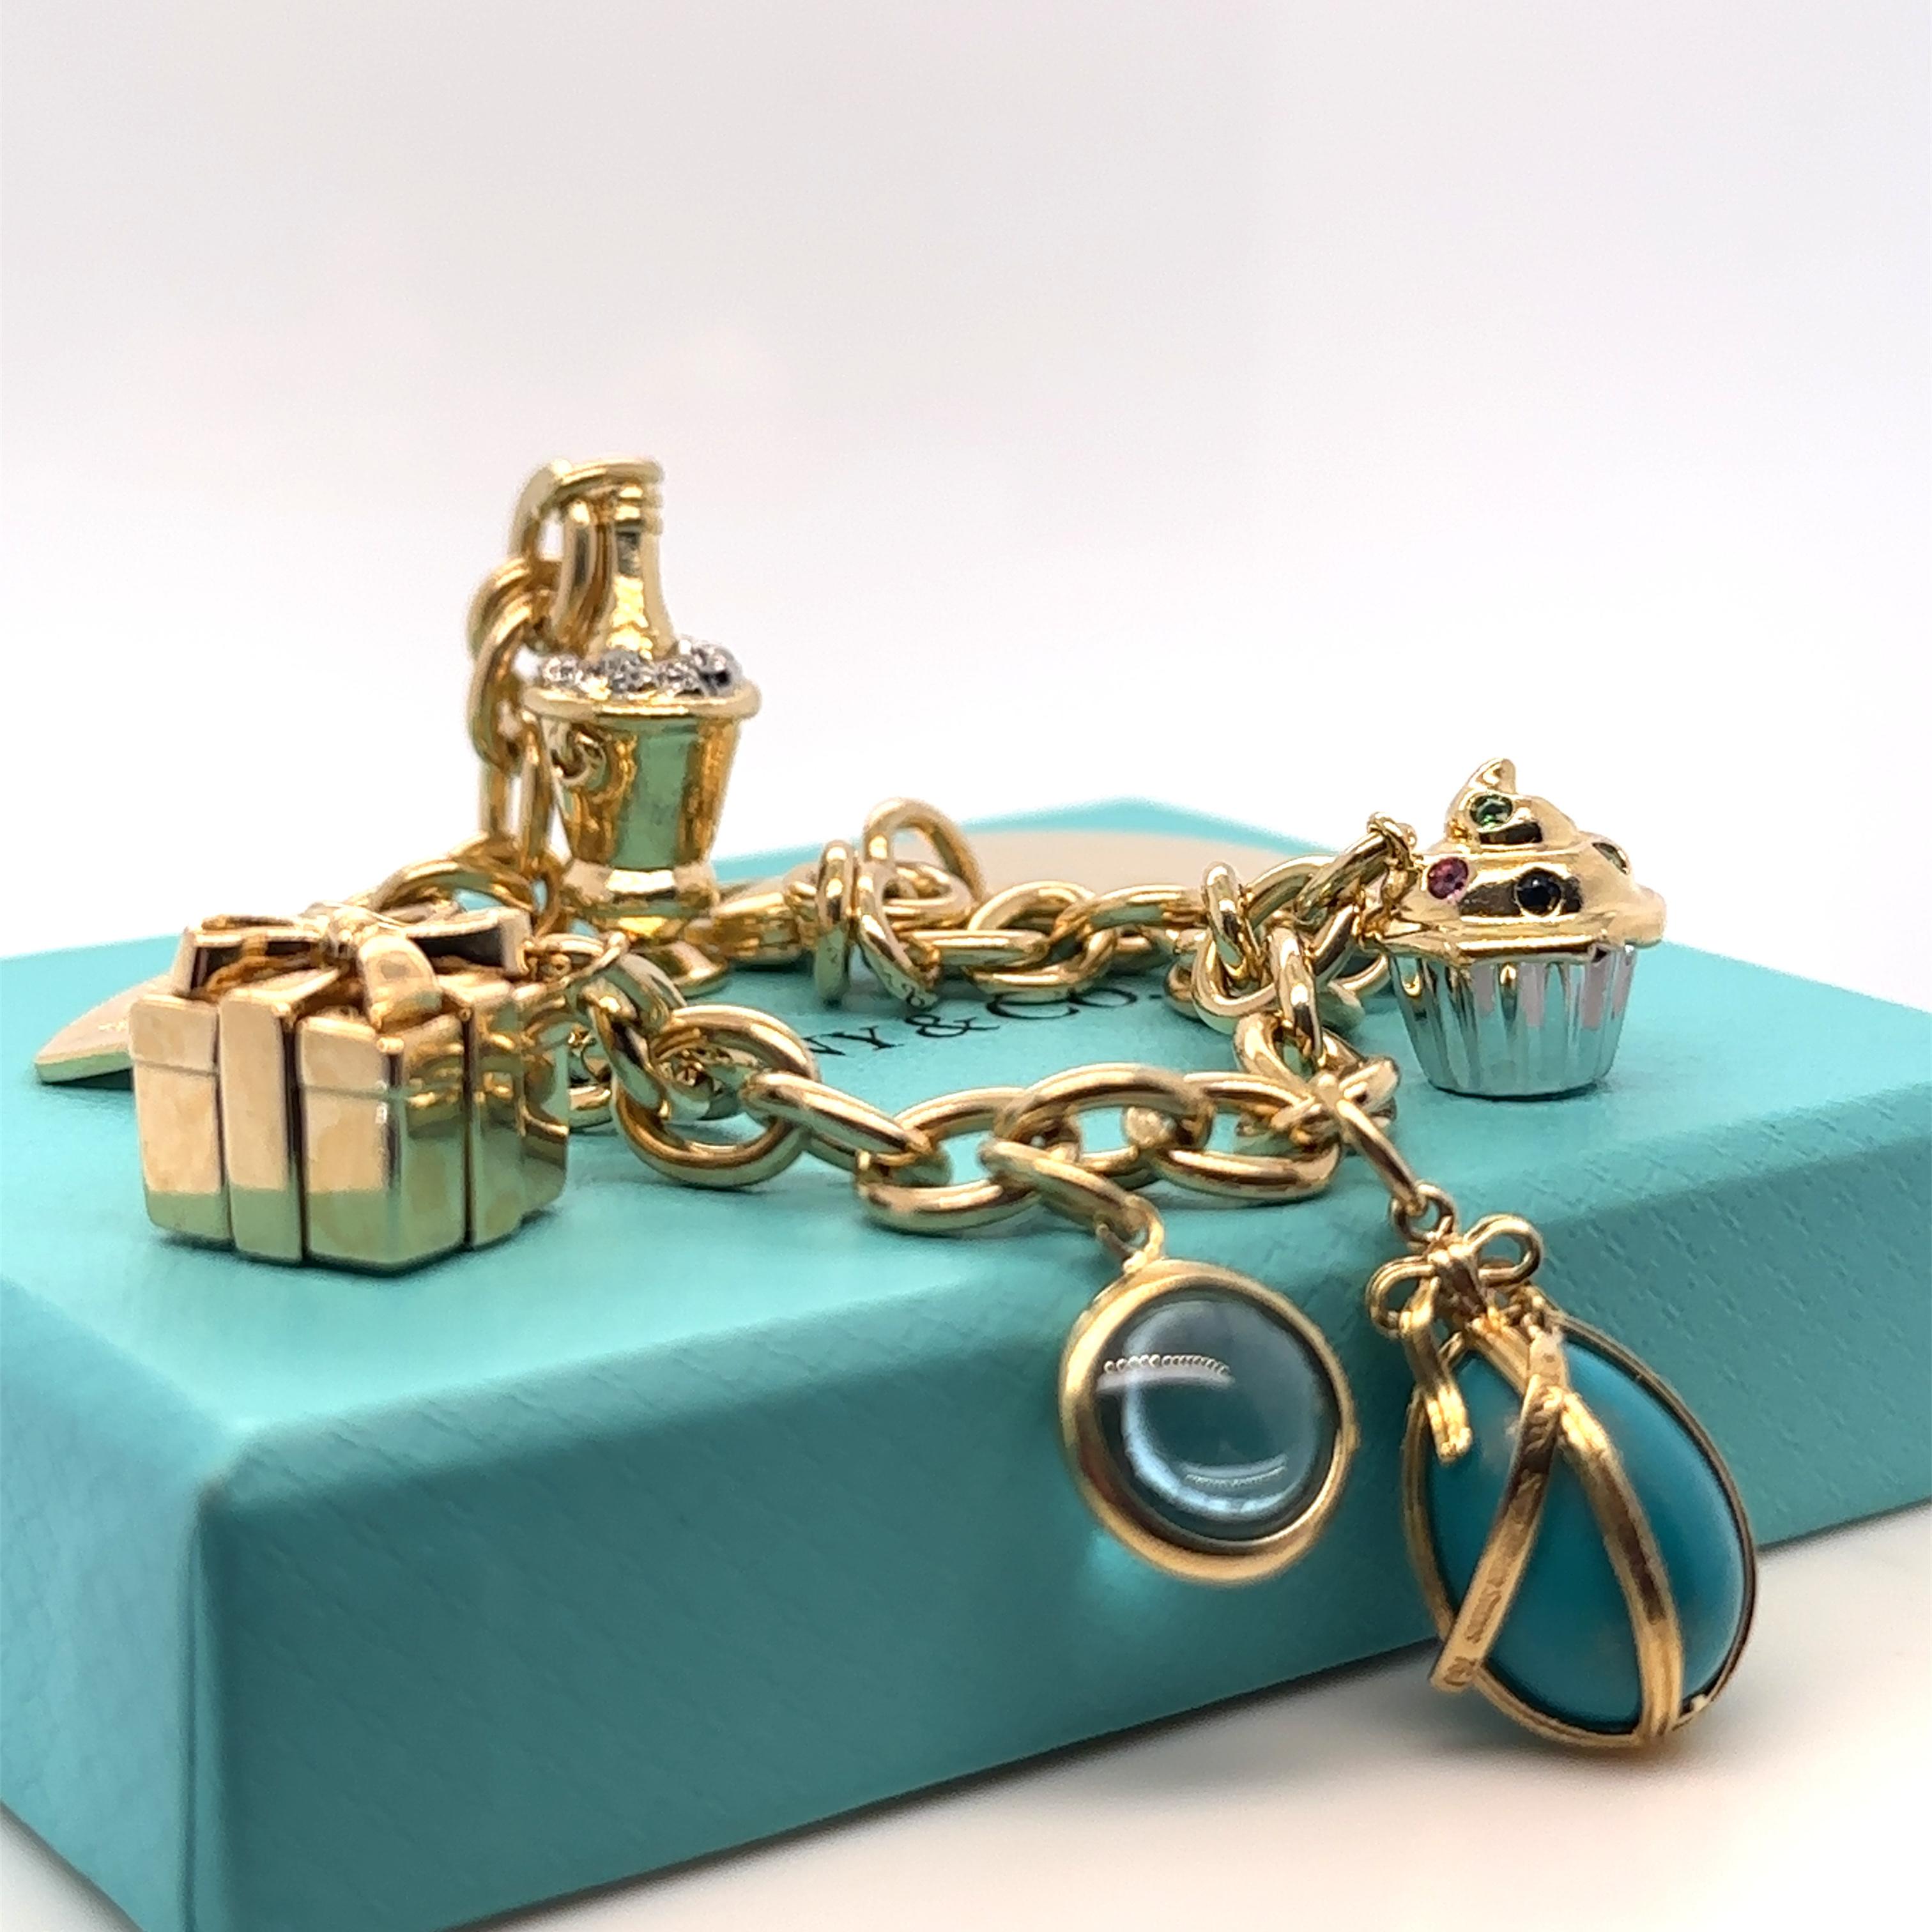 Unique features: 

A Tiffany & Co Dog Chain link Bracelet & Heart Charm with vintage charms (8) in 18ct Gold.

Charms

Tiffany & Co Schlumberger Turquoise Egg Charm Estate 18ct Yellow Gold Pedant (RRP $5,855) 4.2 grams, signed T&Co 750 Schlumberger